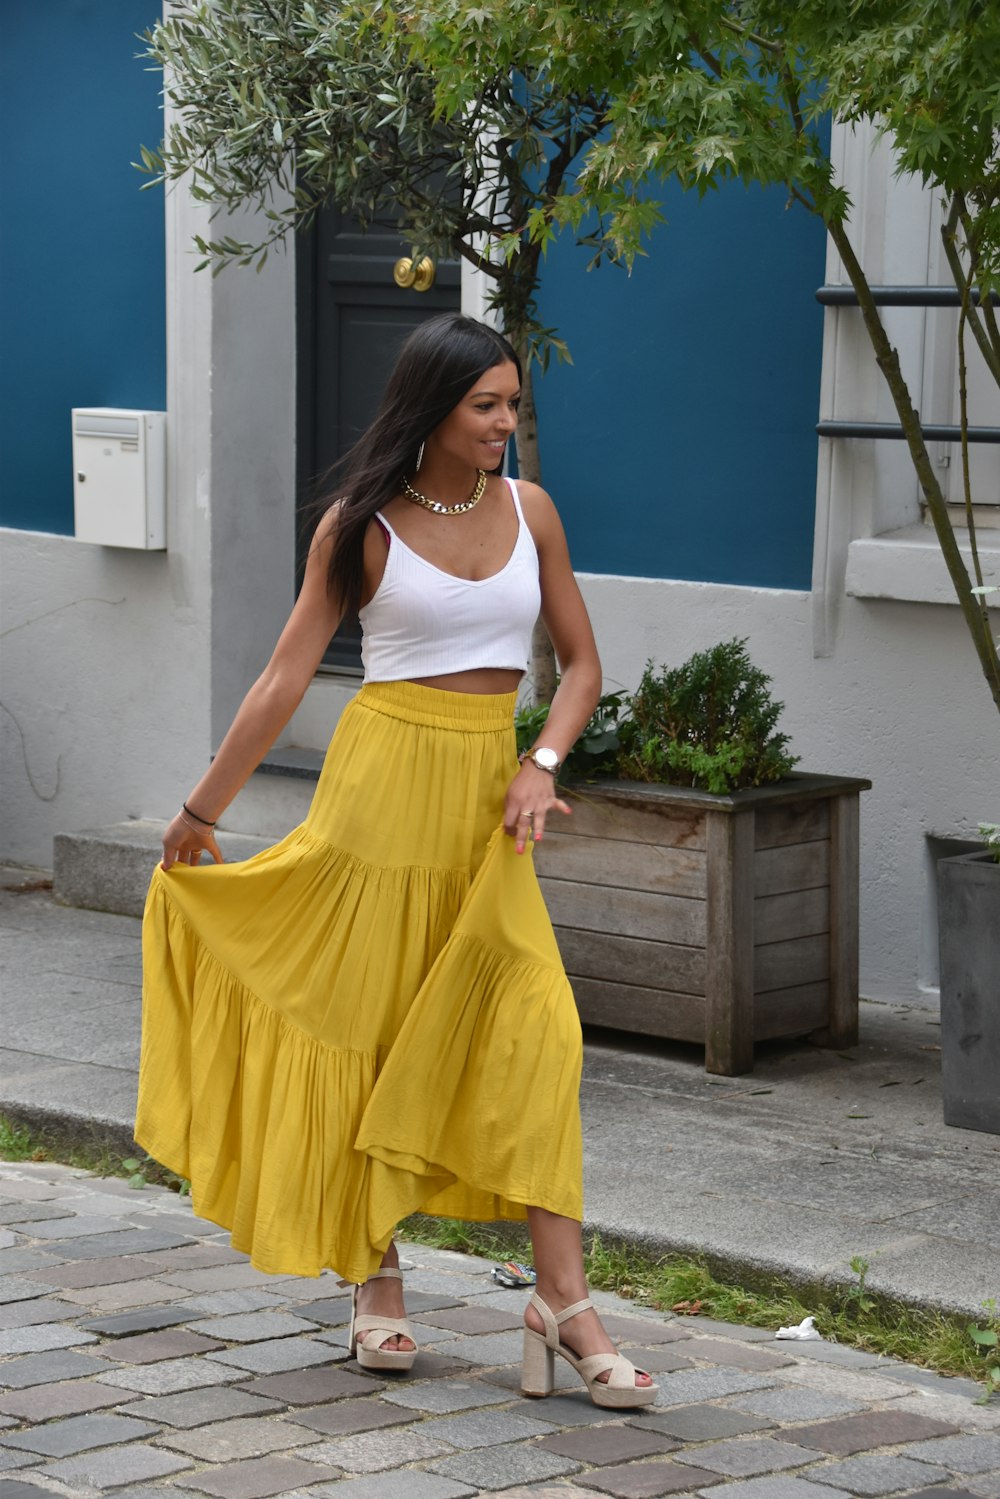 woman in white tank top and yellow skirt standing on gray concrete floor during daytime